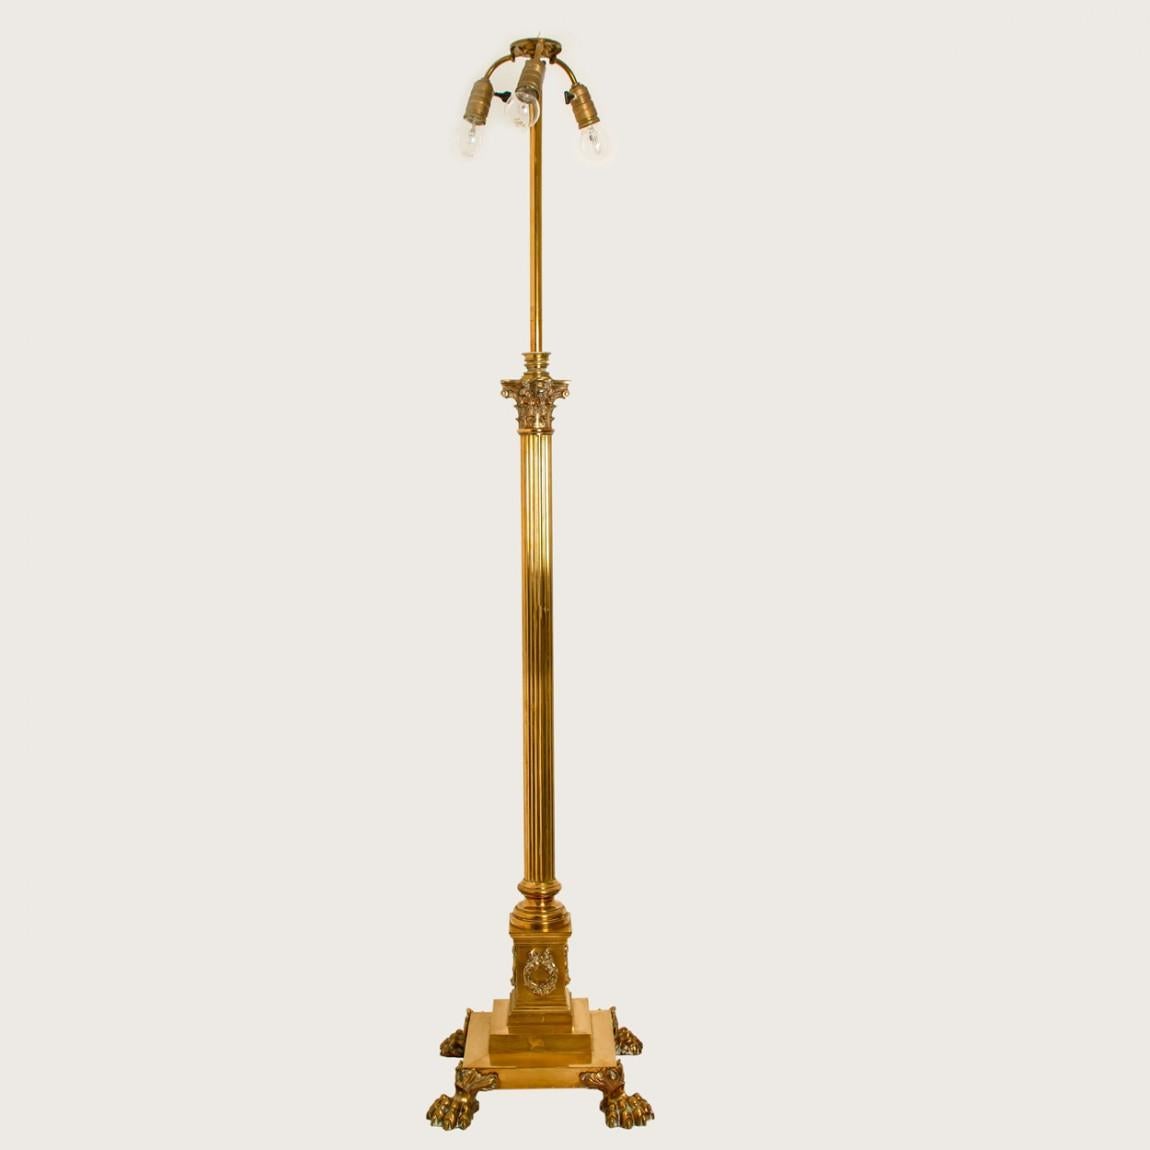 19th Century Antique Corinthian Column Brass Floor Lamp with Fringed Lampshade, England, 1890